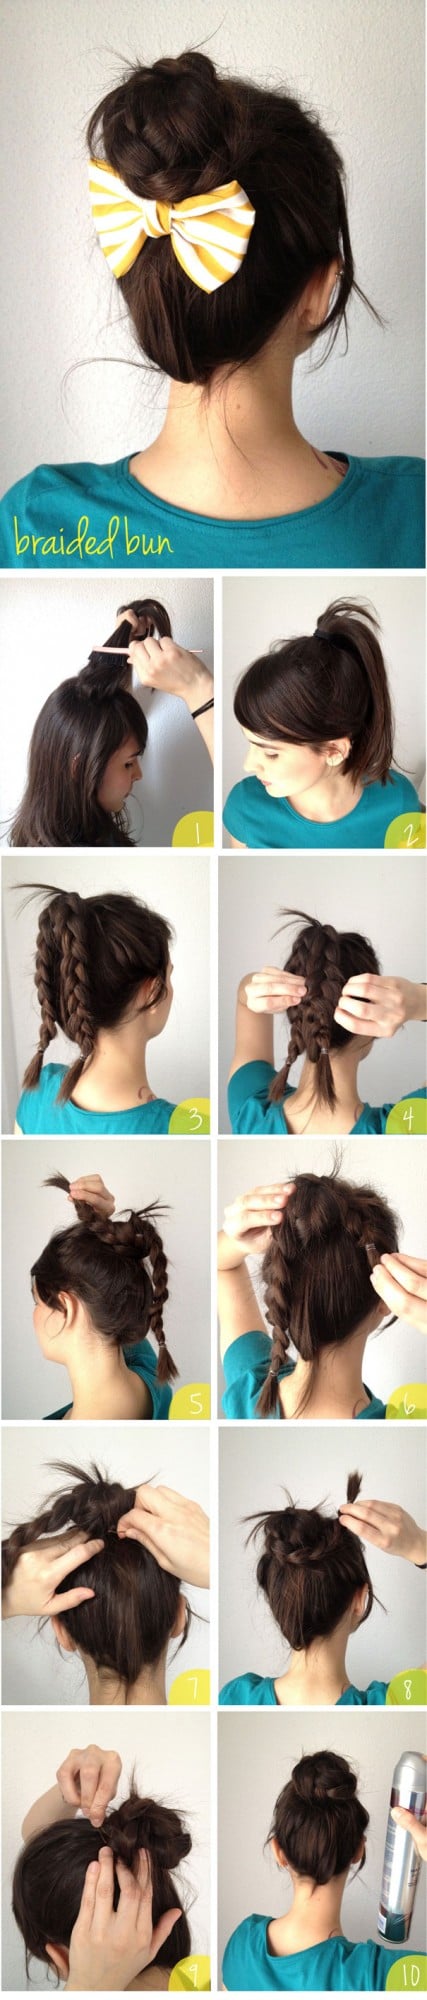 19 Cute and Easy Hairstyles that Can Be Done in 10 Minutes (6)